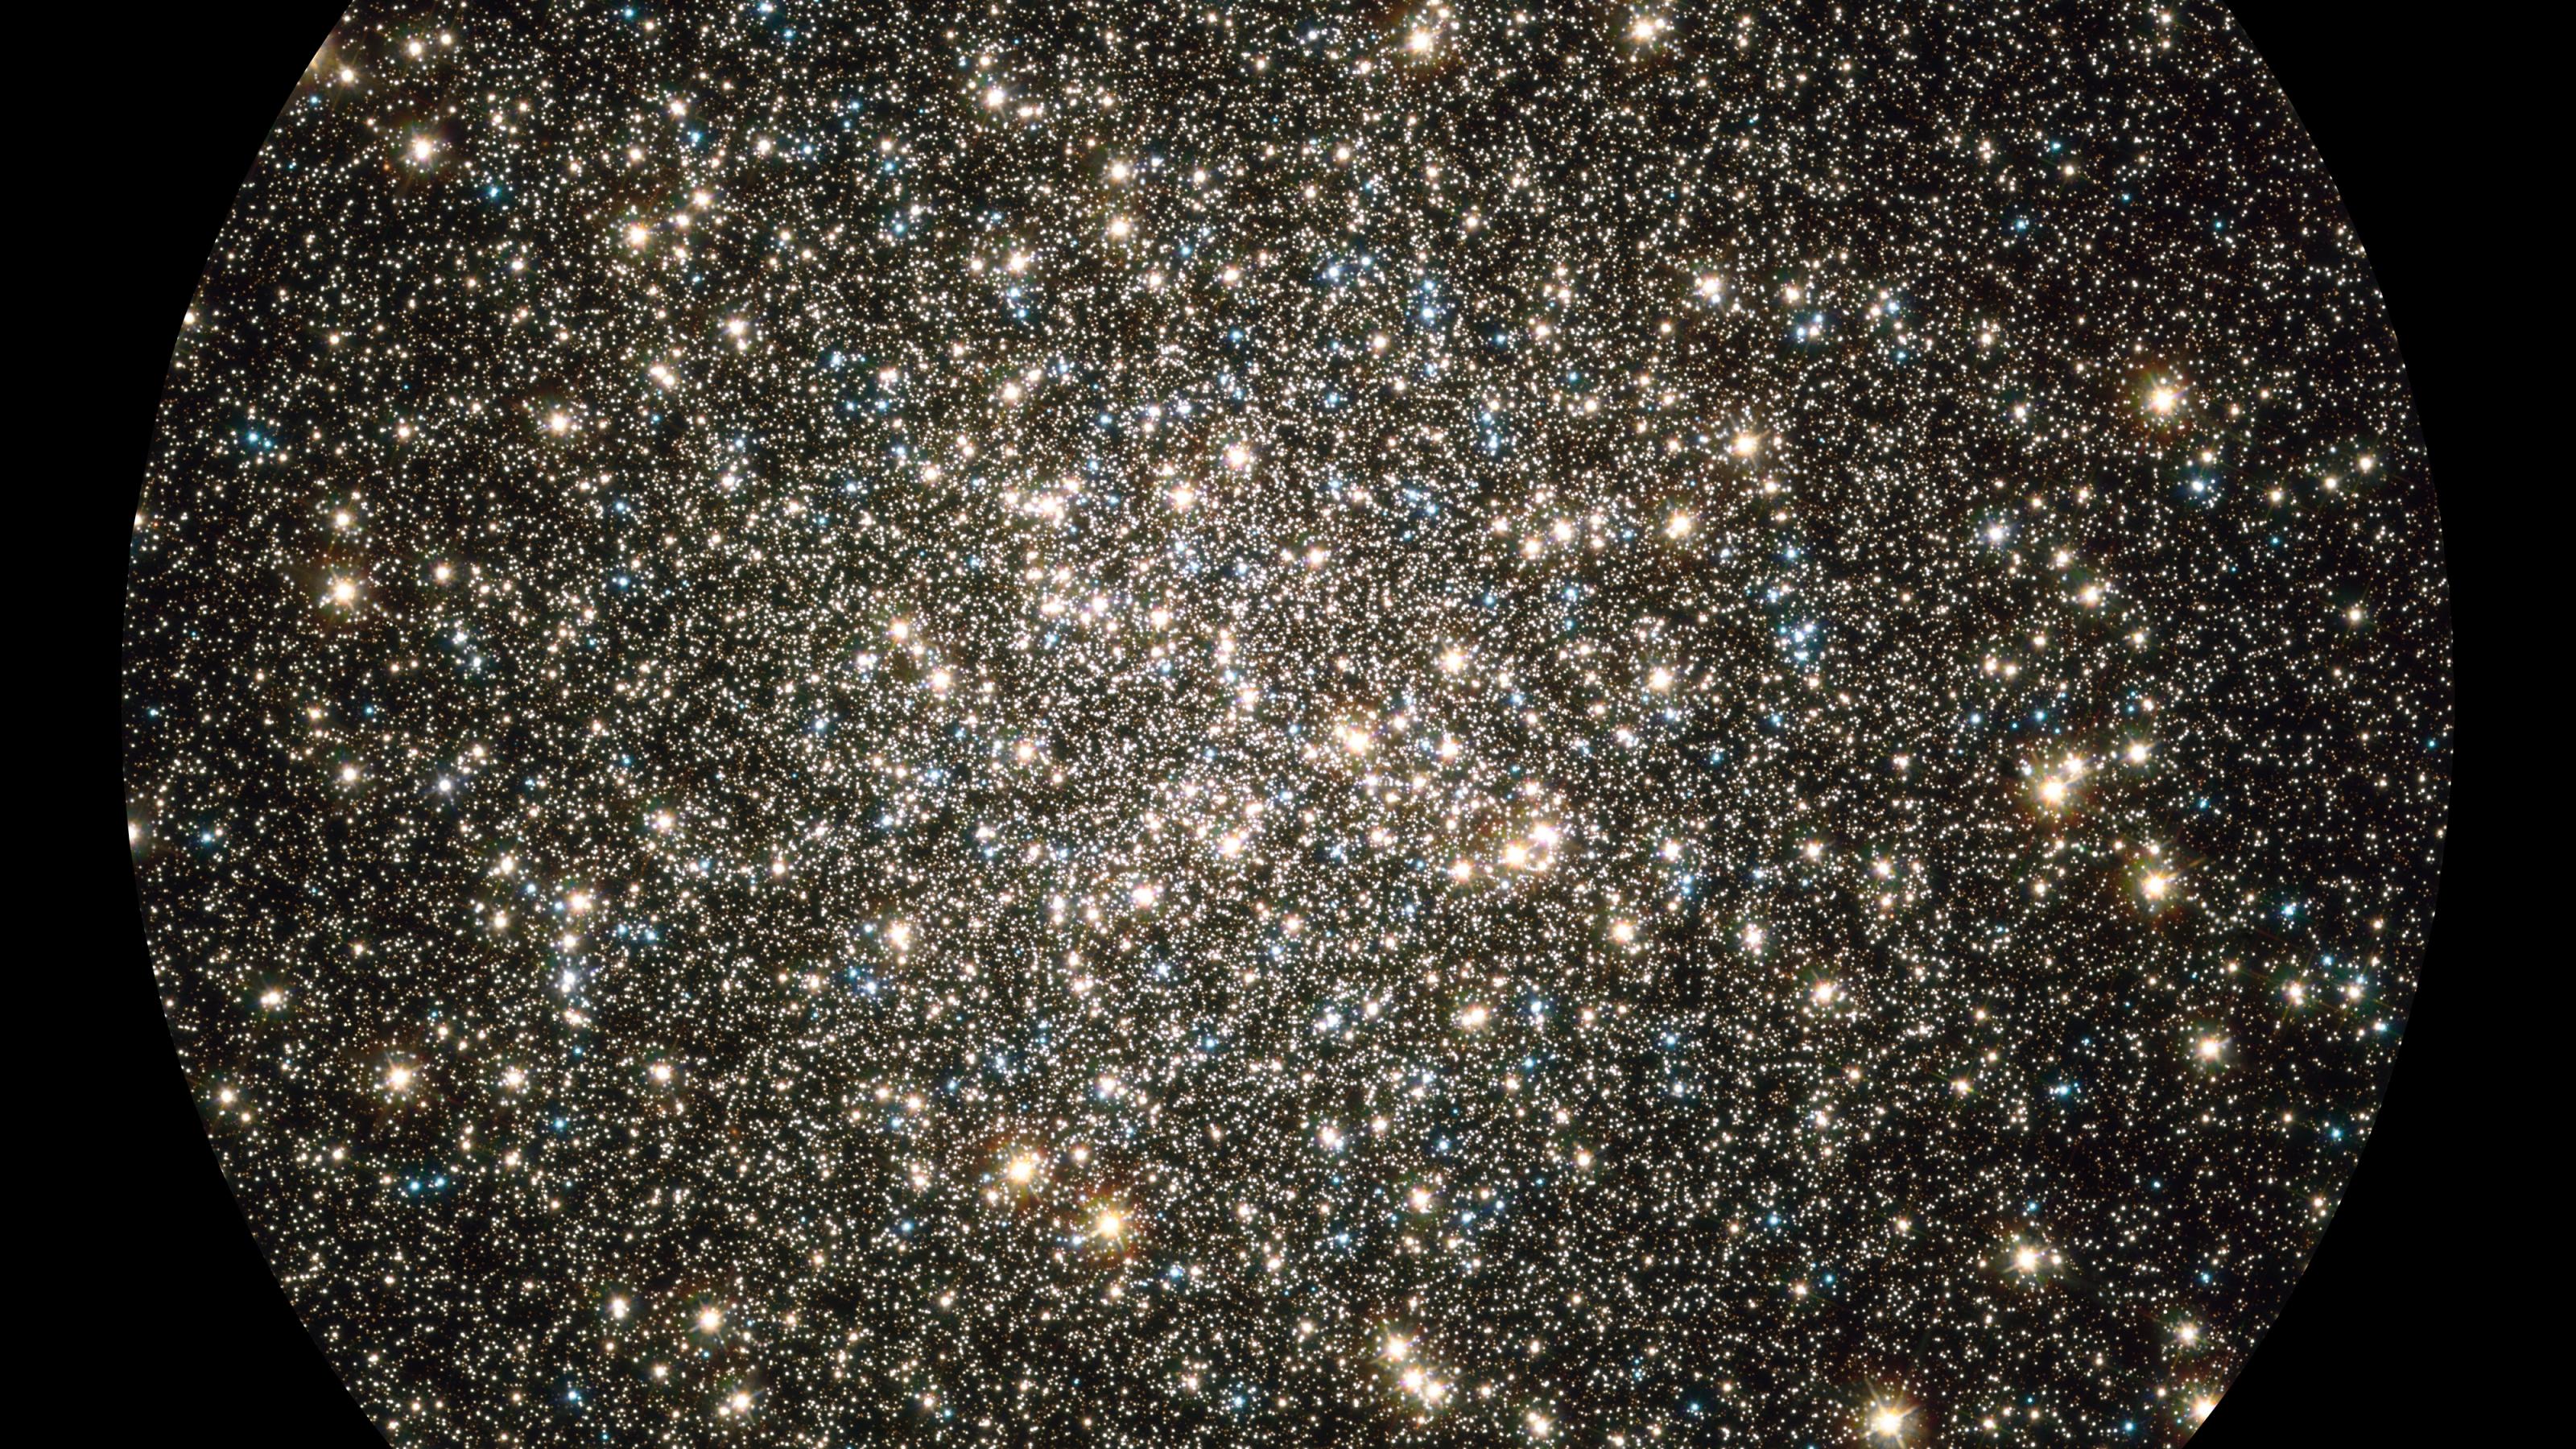 Like a whirl of shiny flakes sparkling in a snow globe, the NASA/ESA Hubble Space Telescope catches an instantaneous glimpse of many hundreds of thousands of stars moving about in the globular cluster M13, one of the brightest and best-known globular clusters in the northern sky. This glittering metropolis of stars is easily found in the winter sky in the constellation Hercules and can even be glimpsed with the unaided eye under dark skies. M13 is home to over 100 000 stars and located at a distance of 25 000 light-years. These stars are packed so closely together in a ball, approximately 150 light-years across, that they will spend their entire lives whirling around in the cluster. This image is a composite of archival Hubble data taken with the Wide Field Planetary Camera 2 and the Advanced Camera for Surveys. Observations from four separate science proposals taken in November 1999, April 2000, August 2005, and April 2006 were used. The image includes broadband filters that isolate light from the blue, visible, and infrared portions of the spectrum.